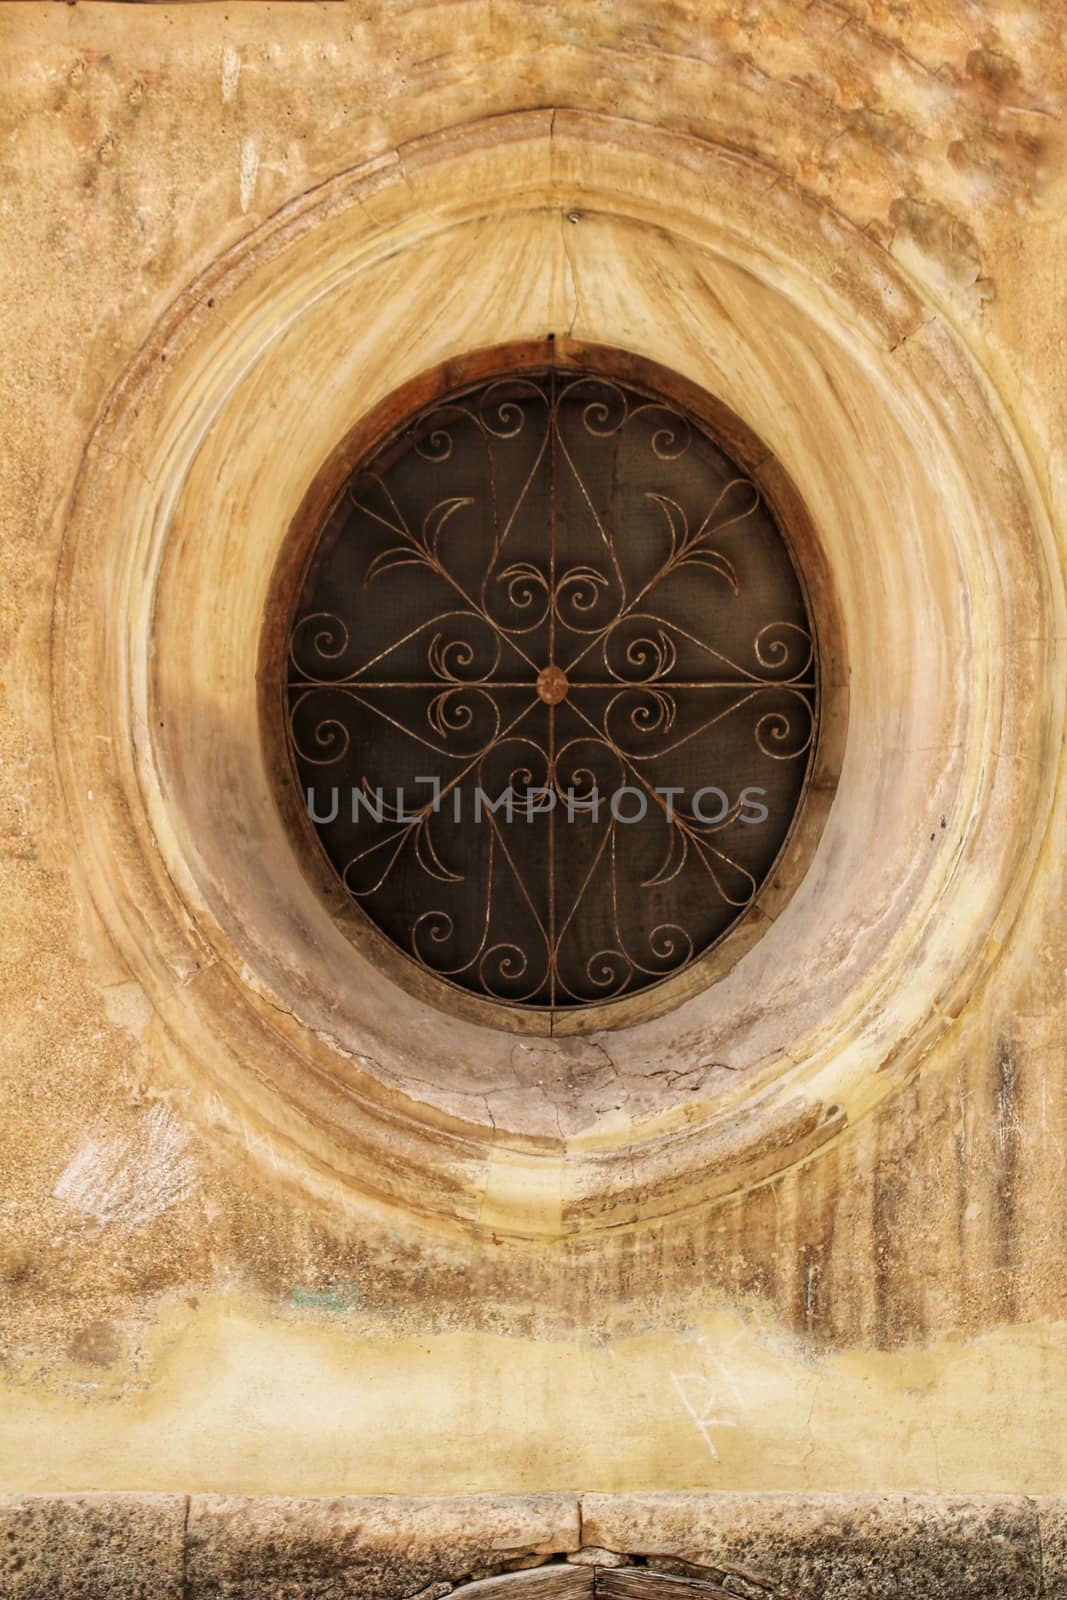 Old stone rosette with forged metal details, Castile-La Mancha, Spain